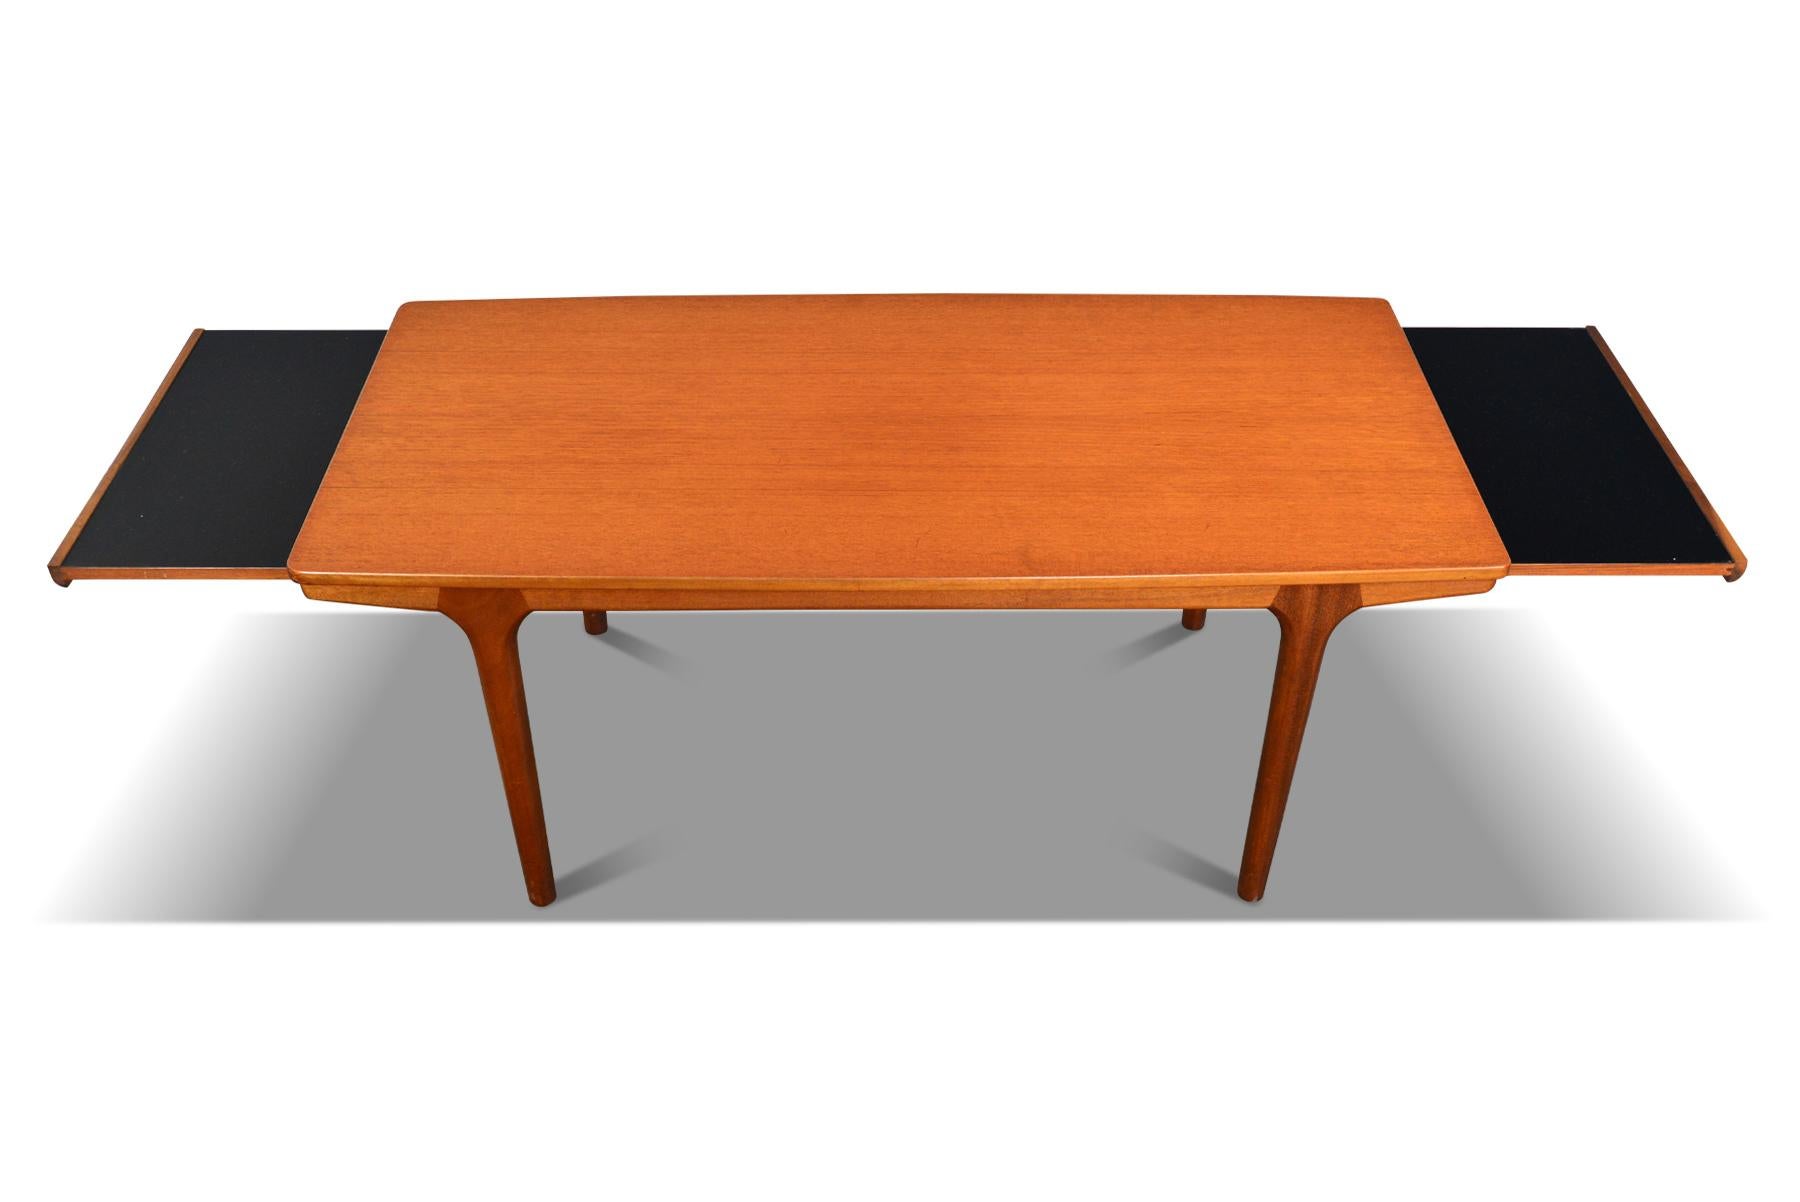 Scottish a.H. McIntosh Teak Surfboard Coffee Table with Pullout Drink Trays #2